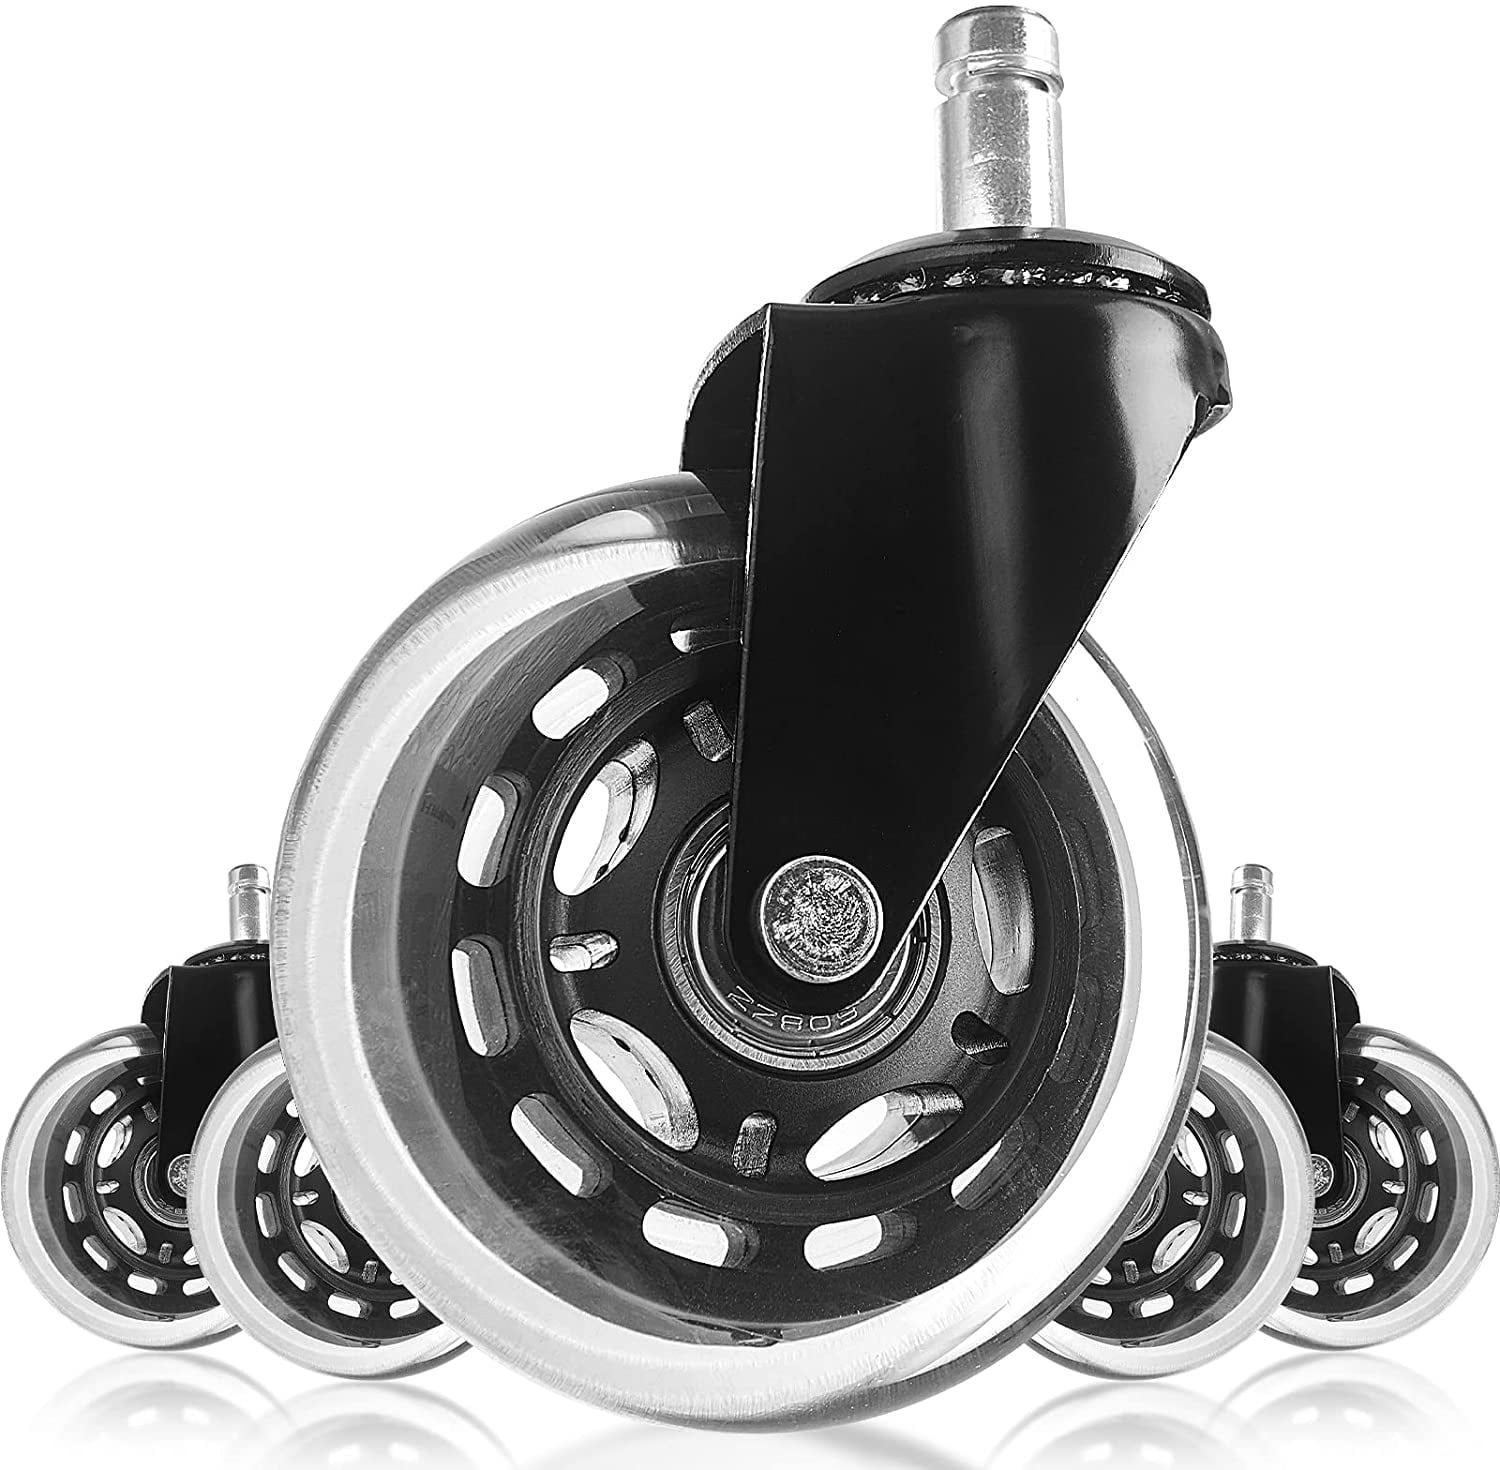 Perfect Fashion Wheels for Floor Protecting Set of 5, Black Hardwood Swivel Chair Quiet Smooth on Floors Office Caster Chair Wheels Heavy Duty Universal Stem Size Rollerblade Style Caster for Office chair